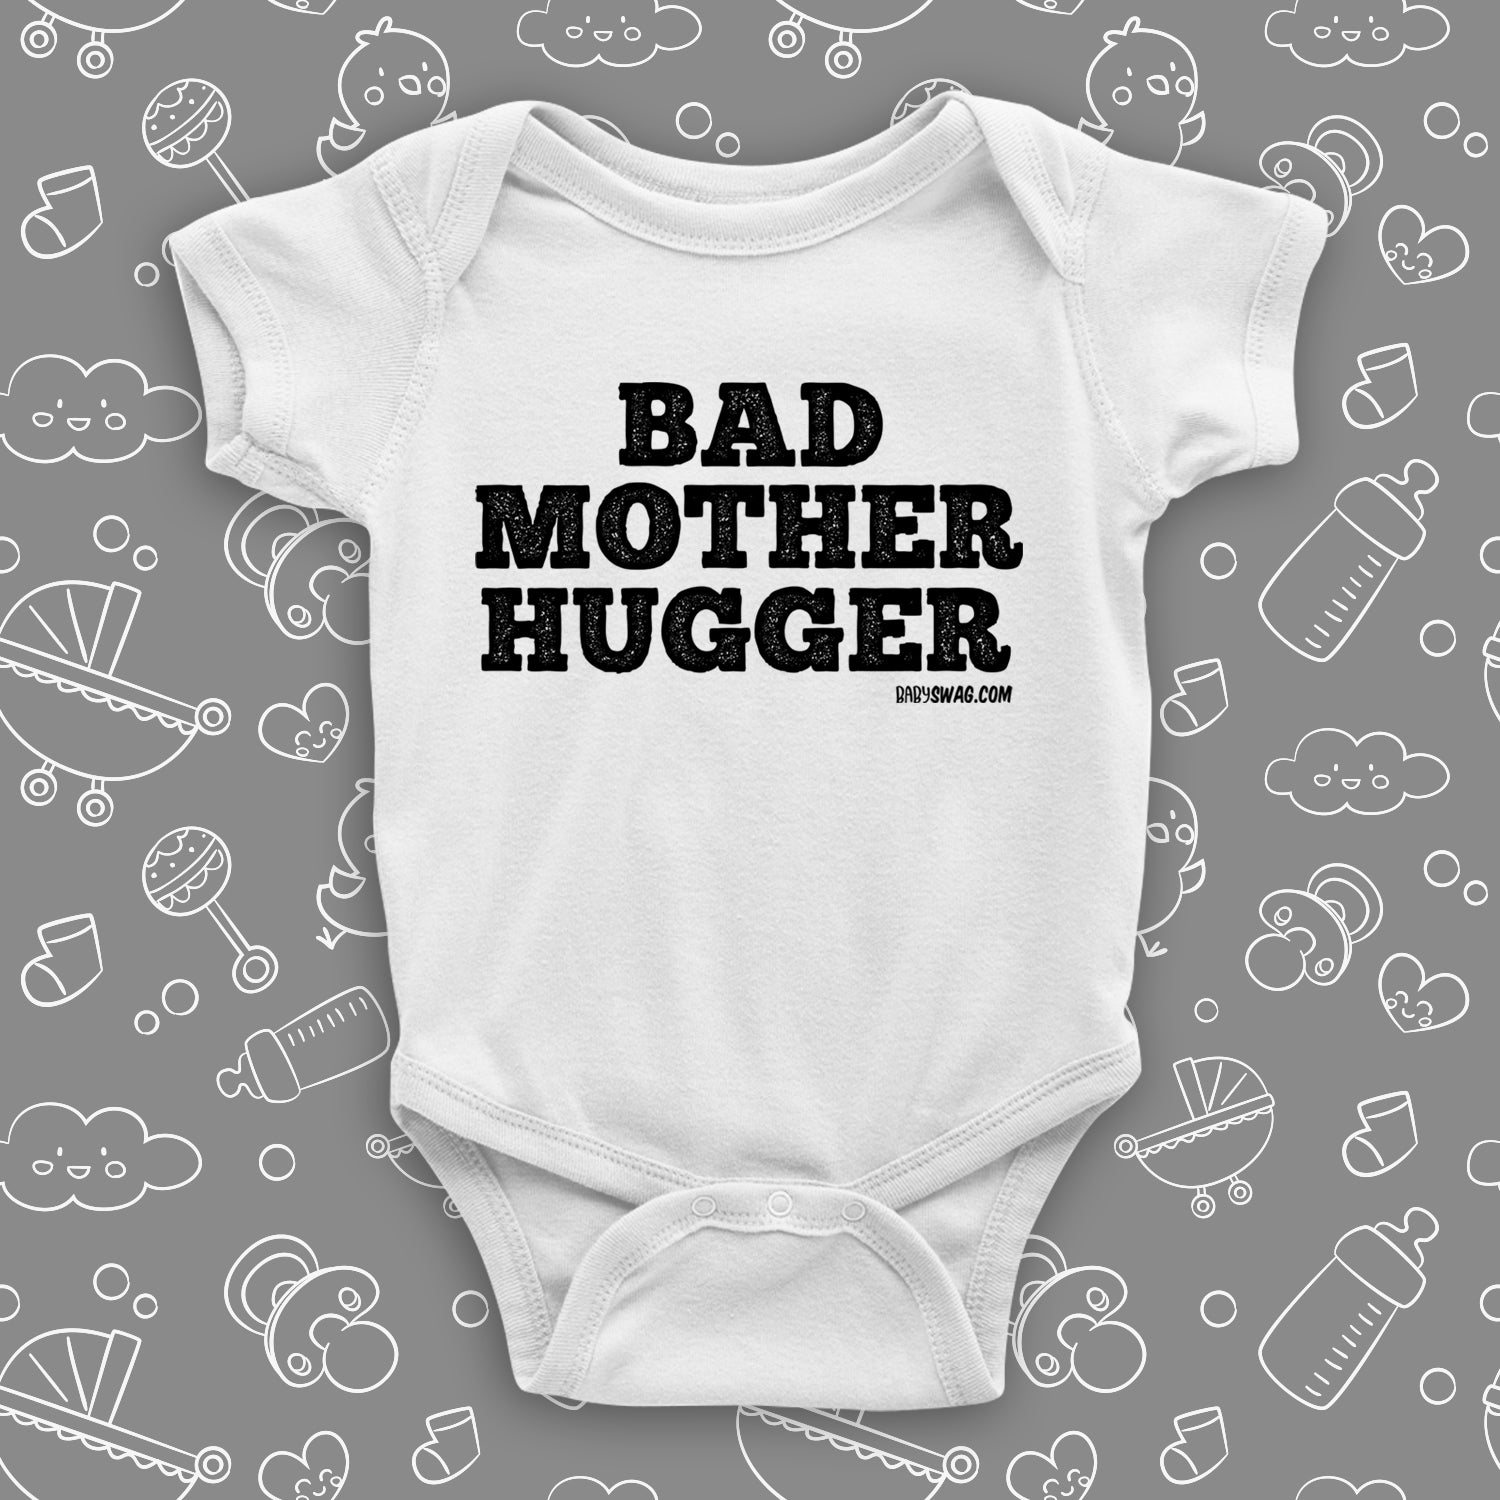 The "Bad Mother Hugger" funny baby onesies in white.